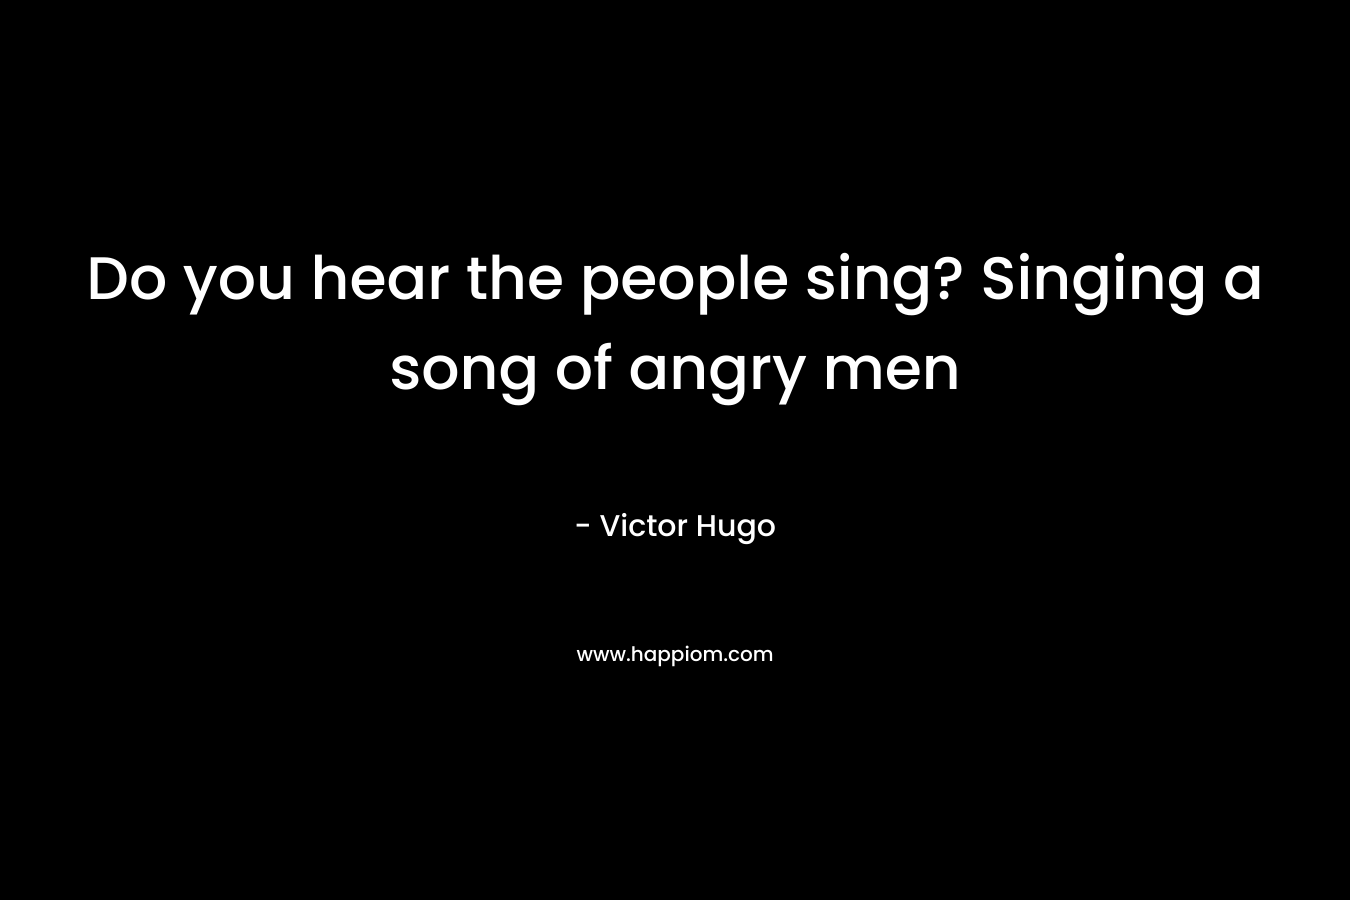 Do you hear the people sing? Singing a song of angry men